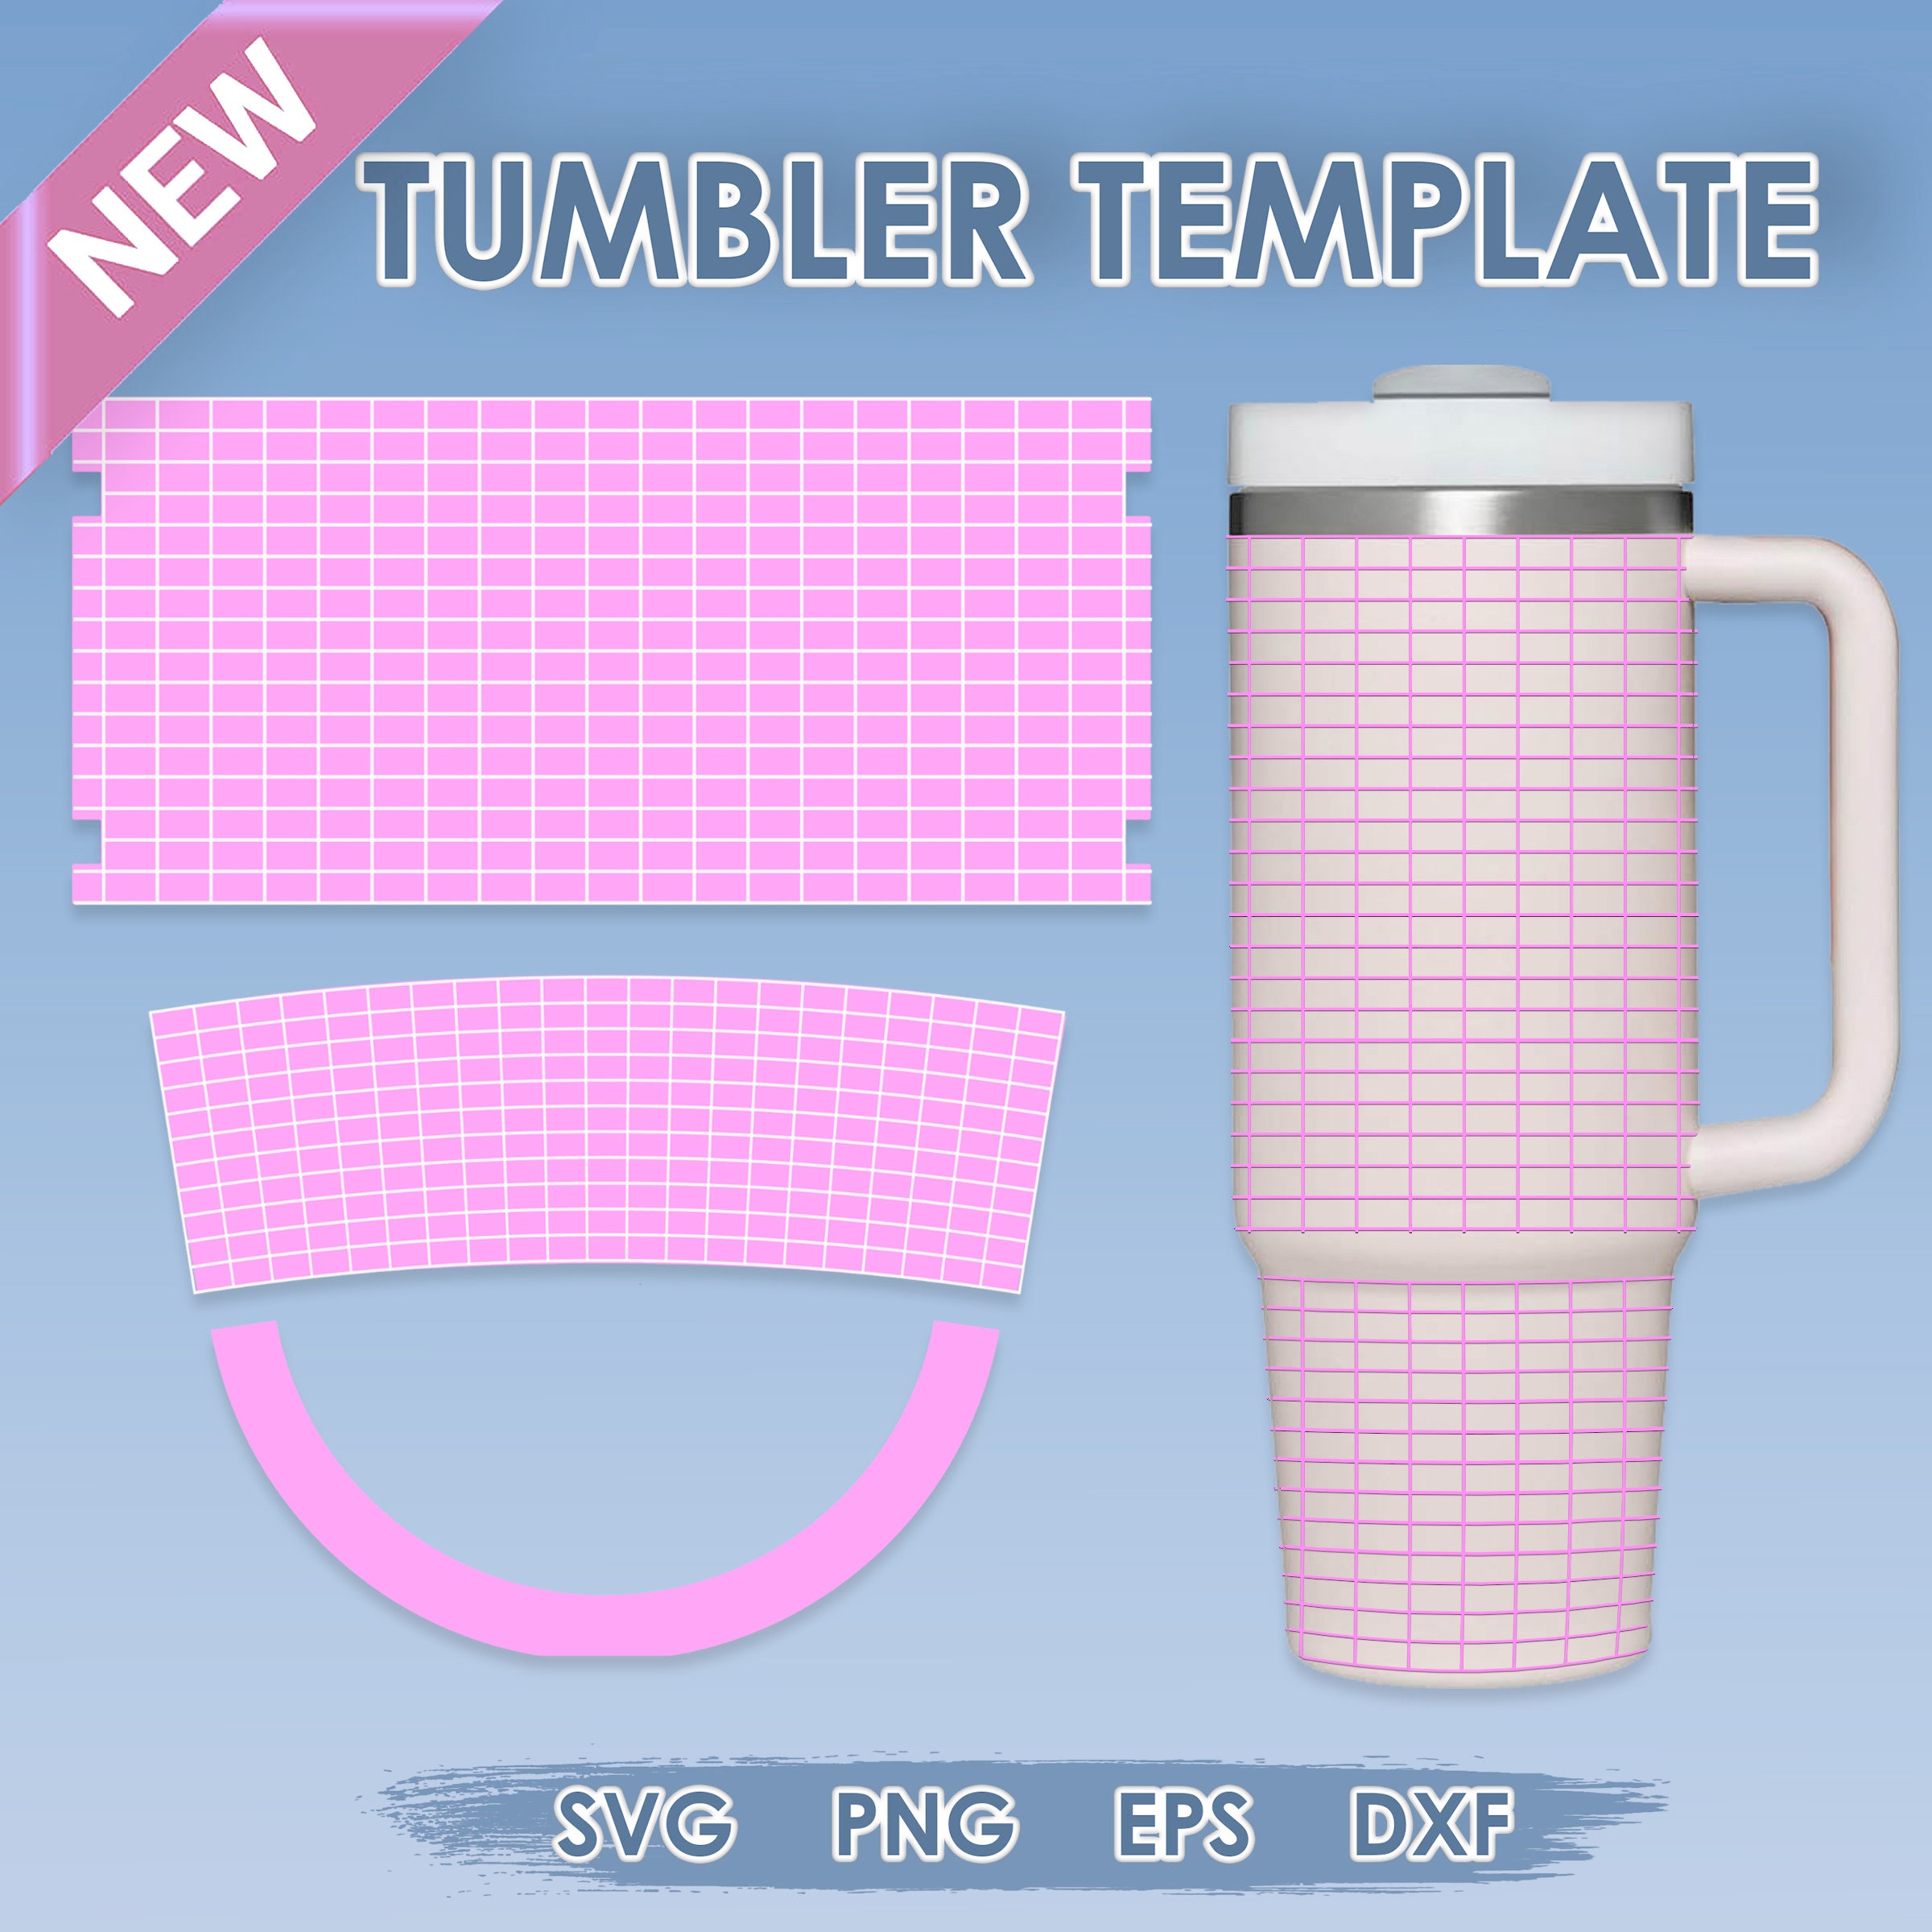 40 oz Stanley Dupe Tumbler – Lo Scopo Crafts and Blanks